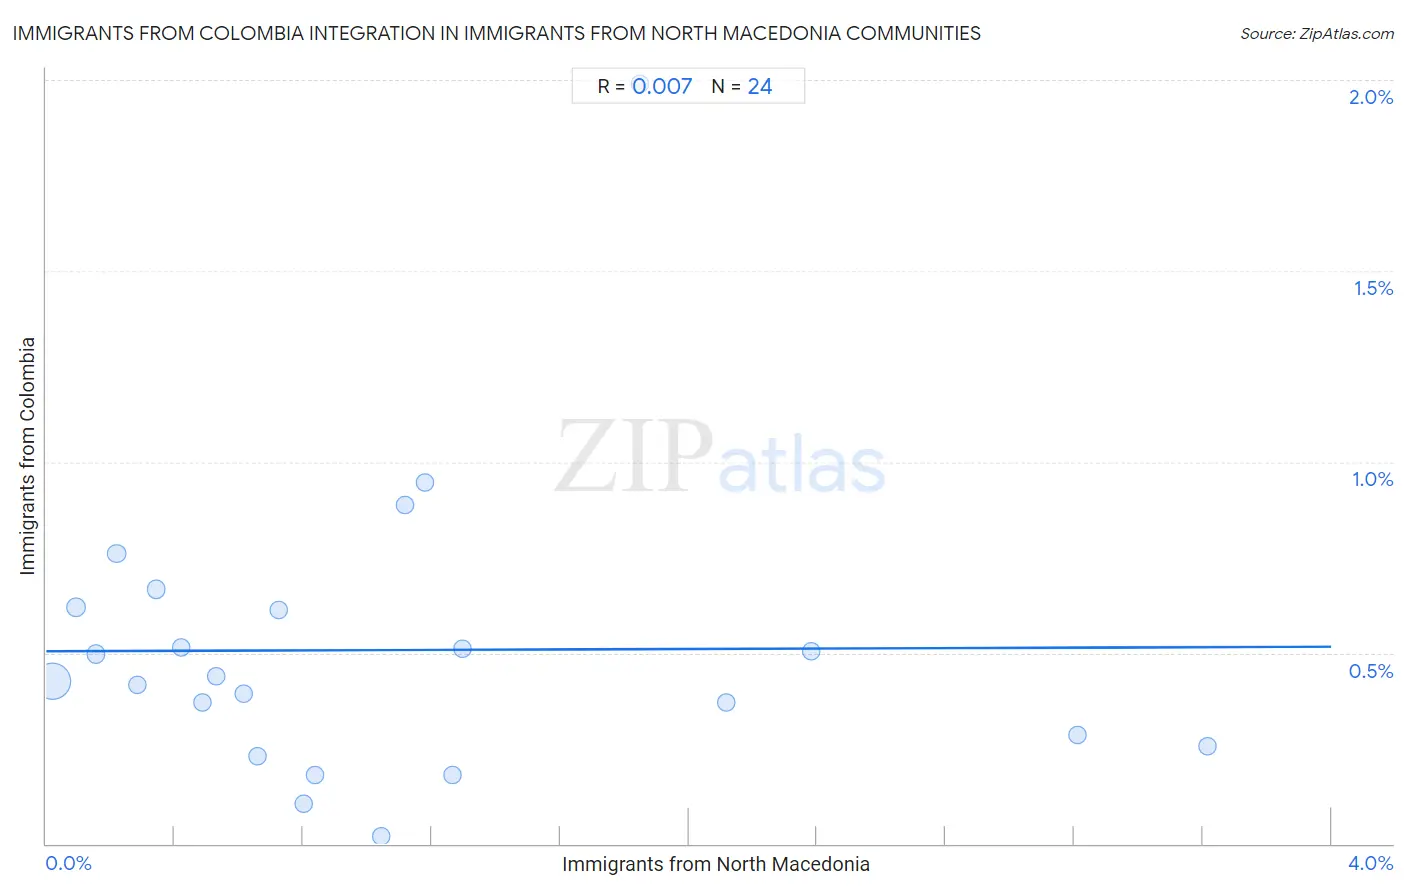 Immigrants from North Macedonia Integration in Immigrants from Colombia Communities